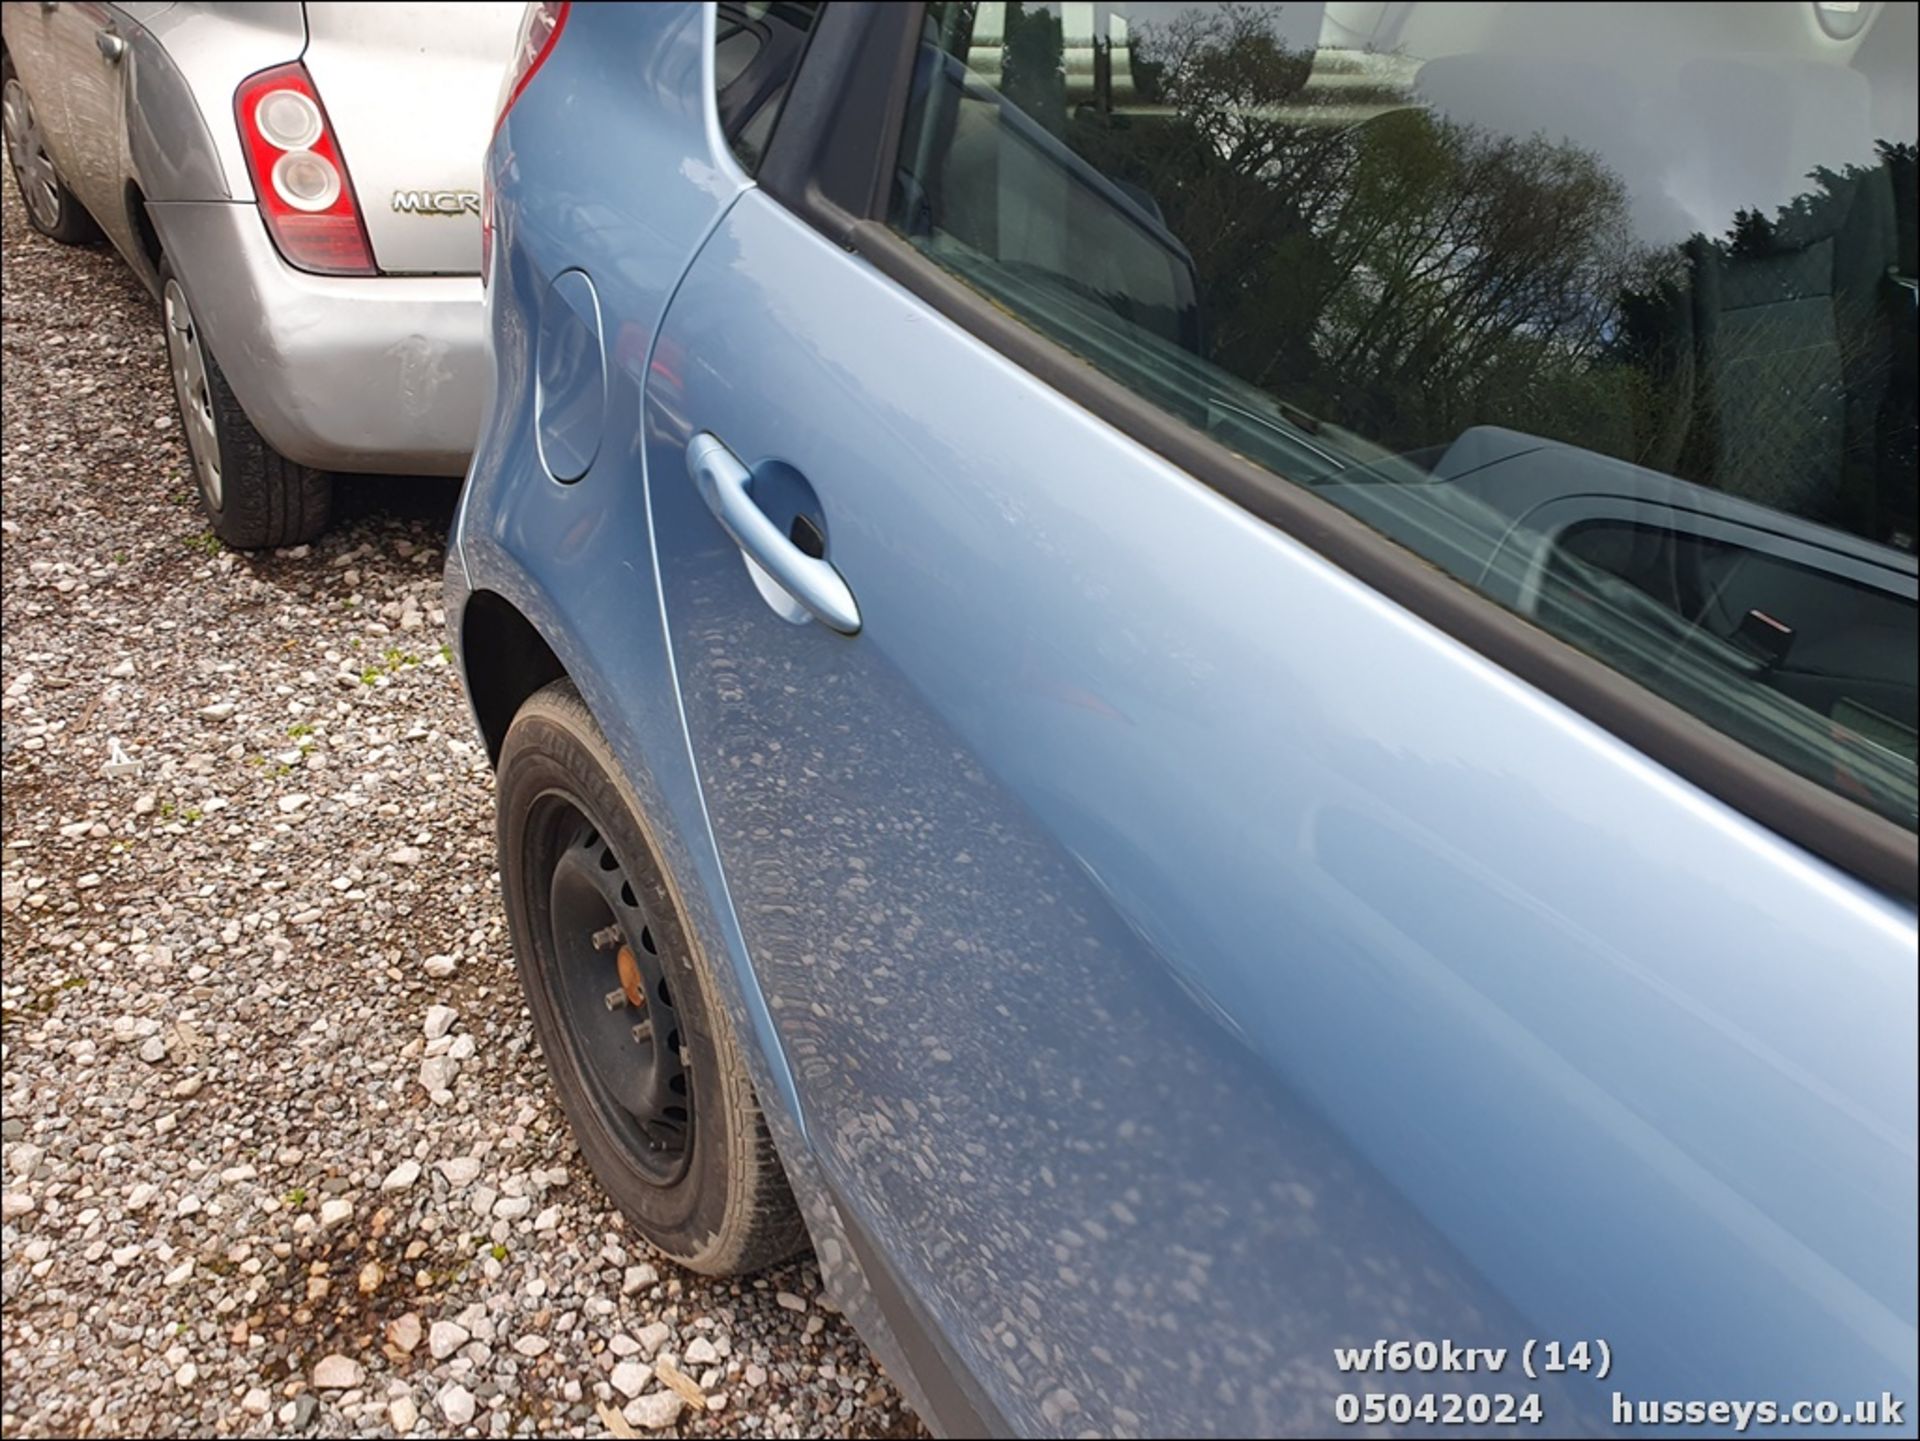 10/60 RENAULT SCENIC EXPRESSION DCI 105 - 1461cc 5dr MPV (Blue) - Image 15 of 50